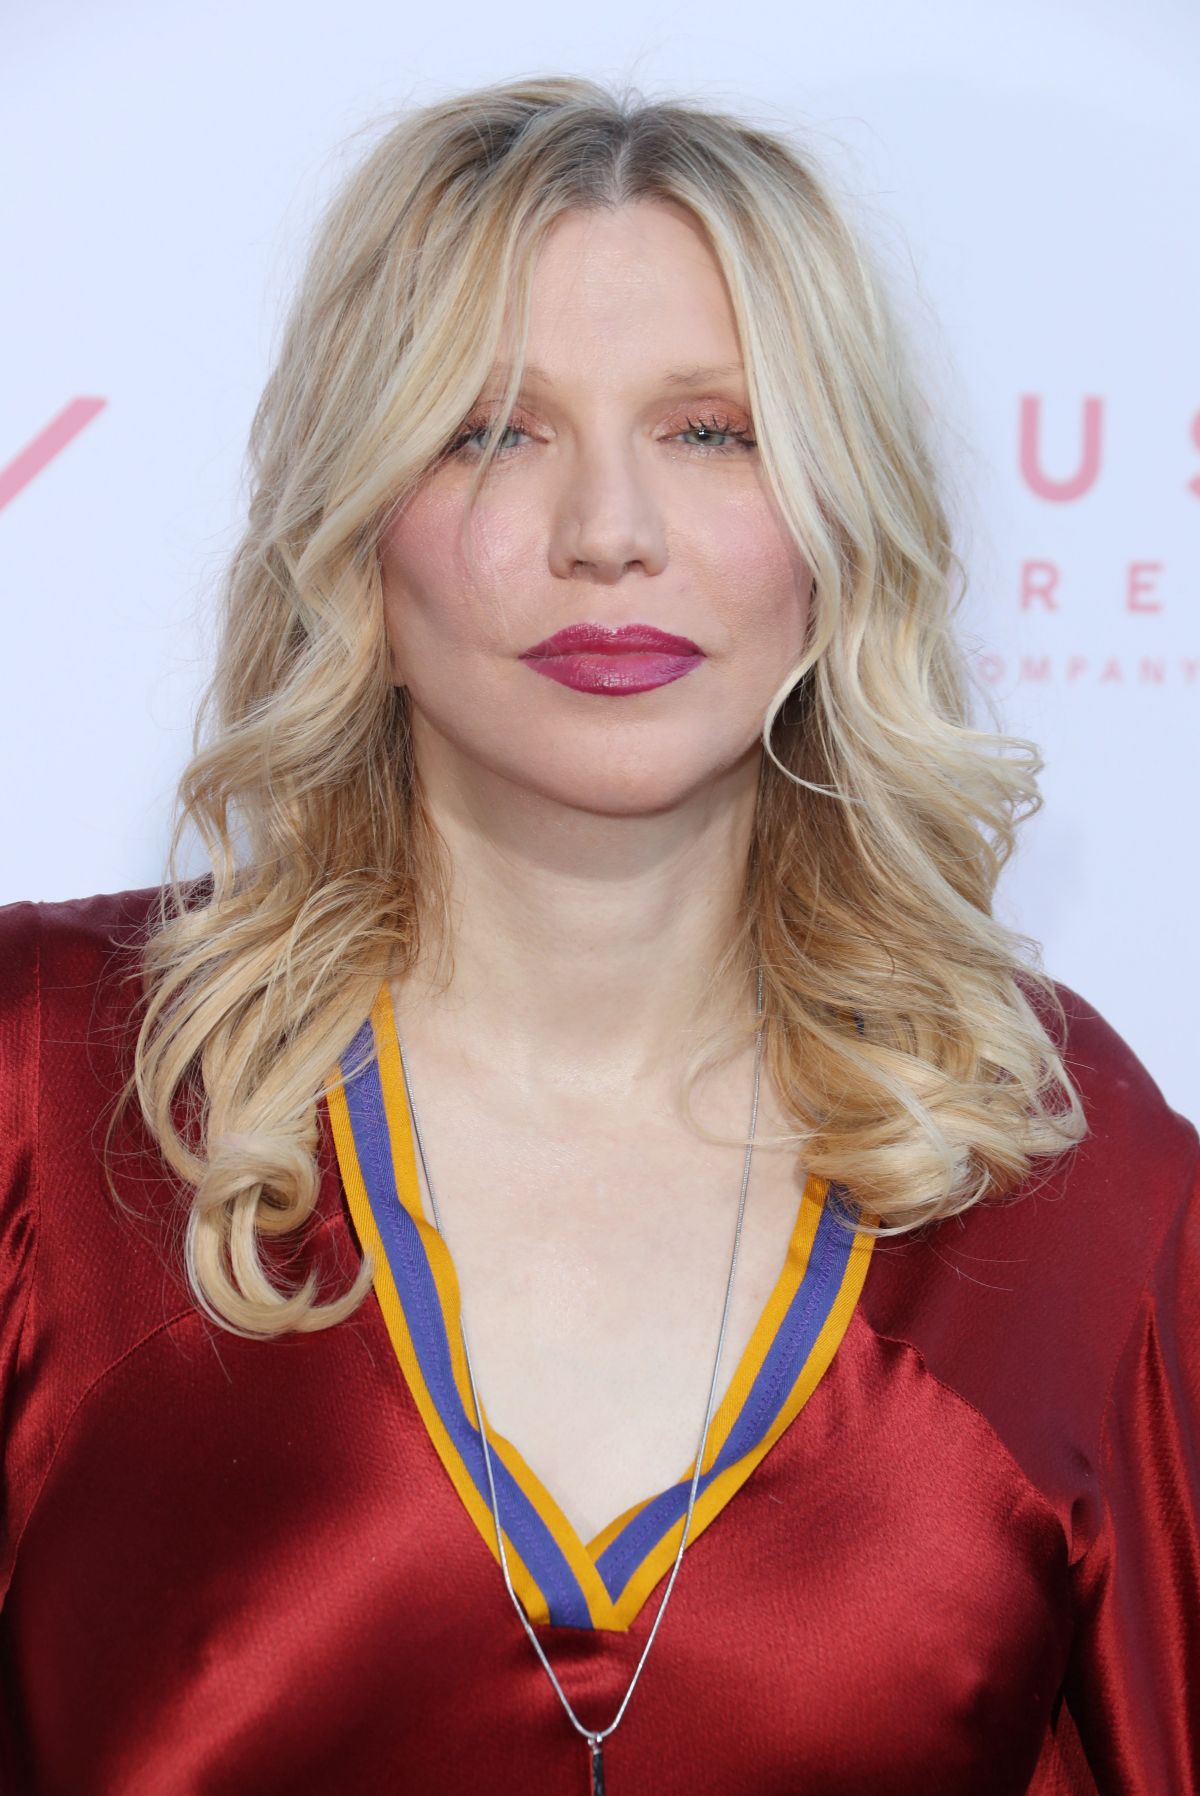 Courtney Love - Courtney Love - 'Kurt Cobain - Montage of Heck' Premiere ... - Love spent her early years living in hippie communes in oregon and at schools in europe and new zealand, under the care of her mother and other family.